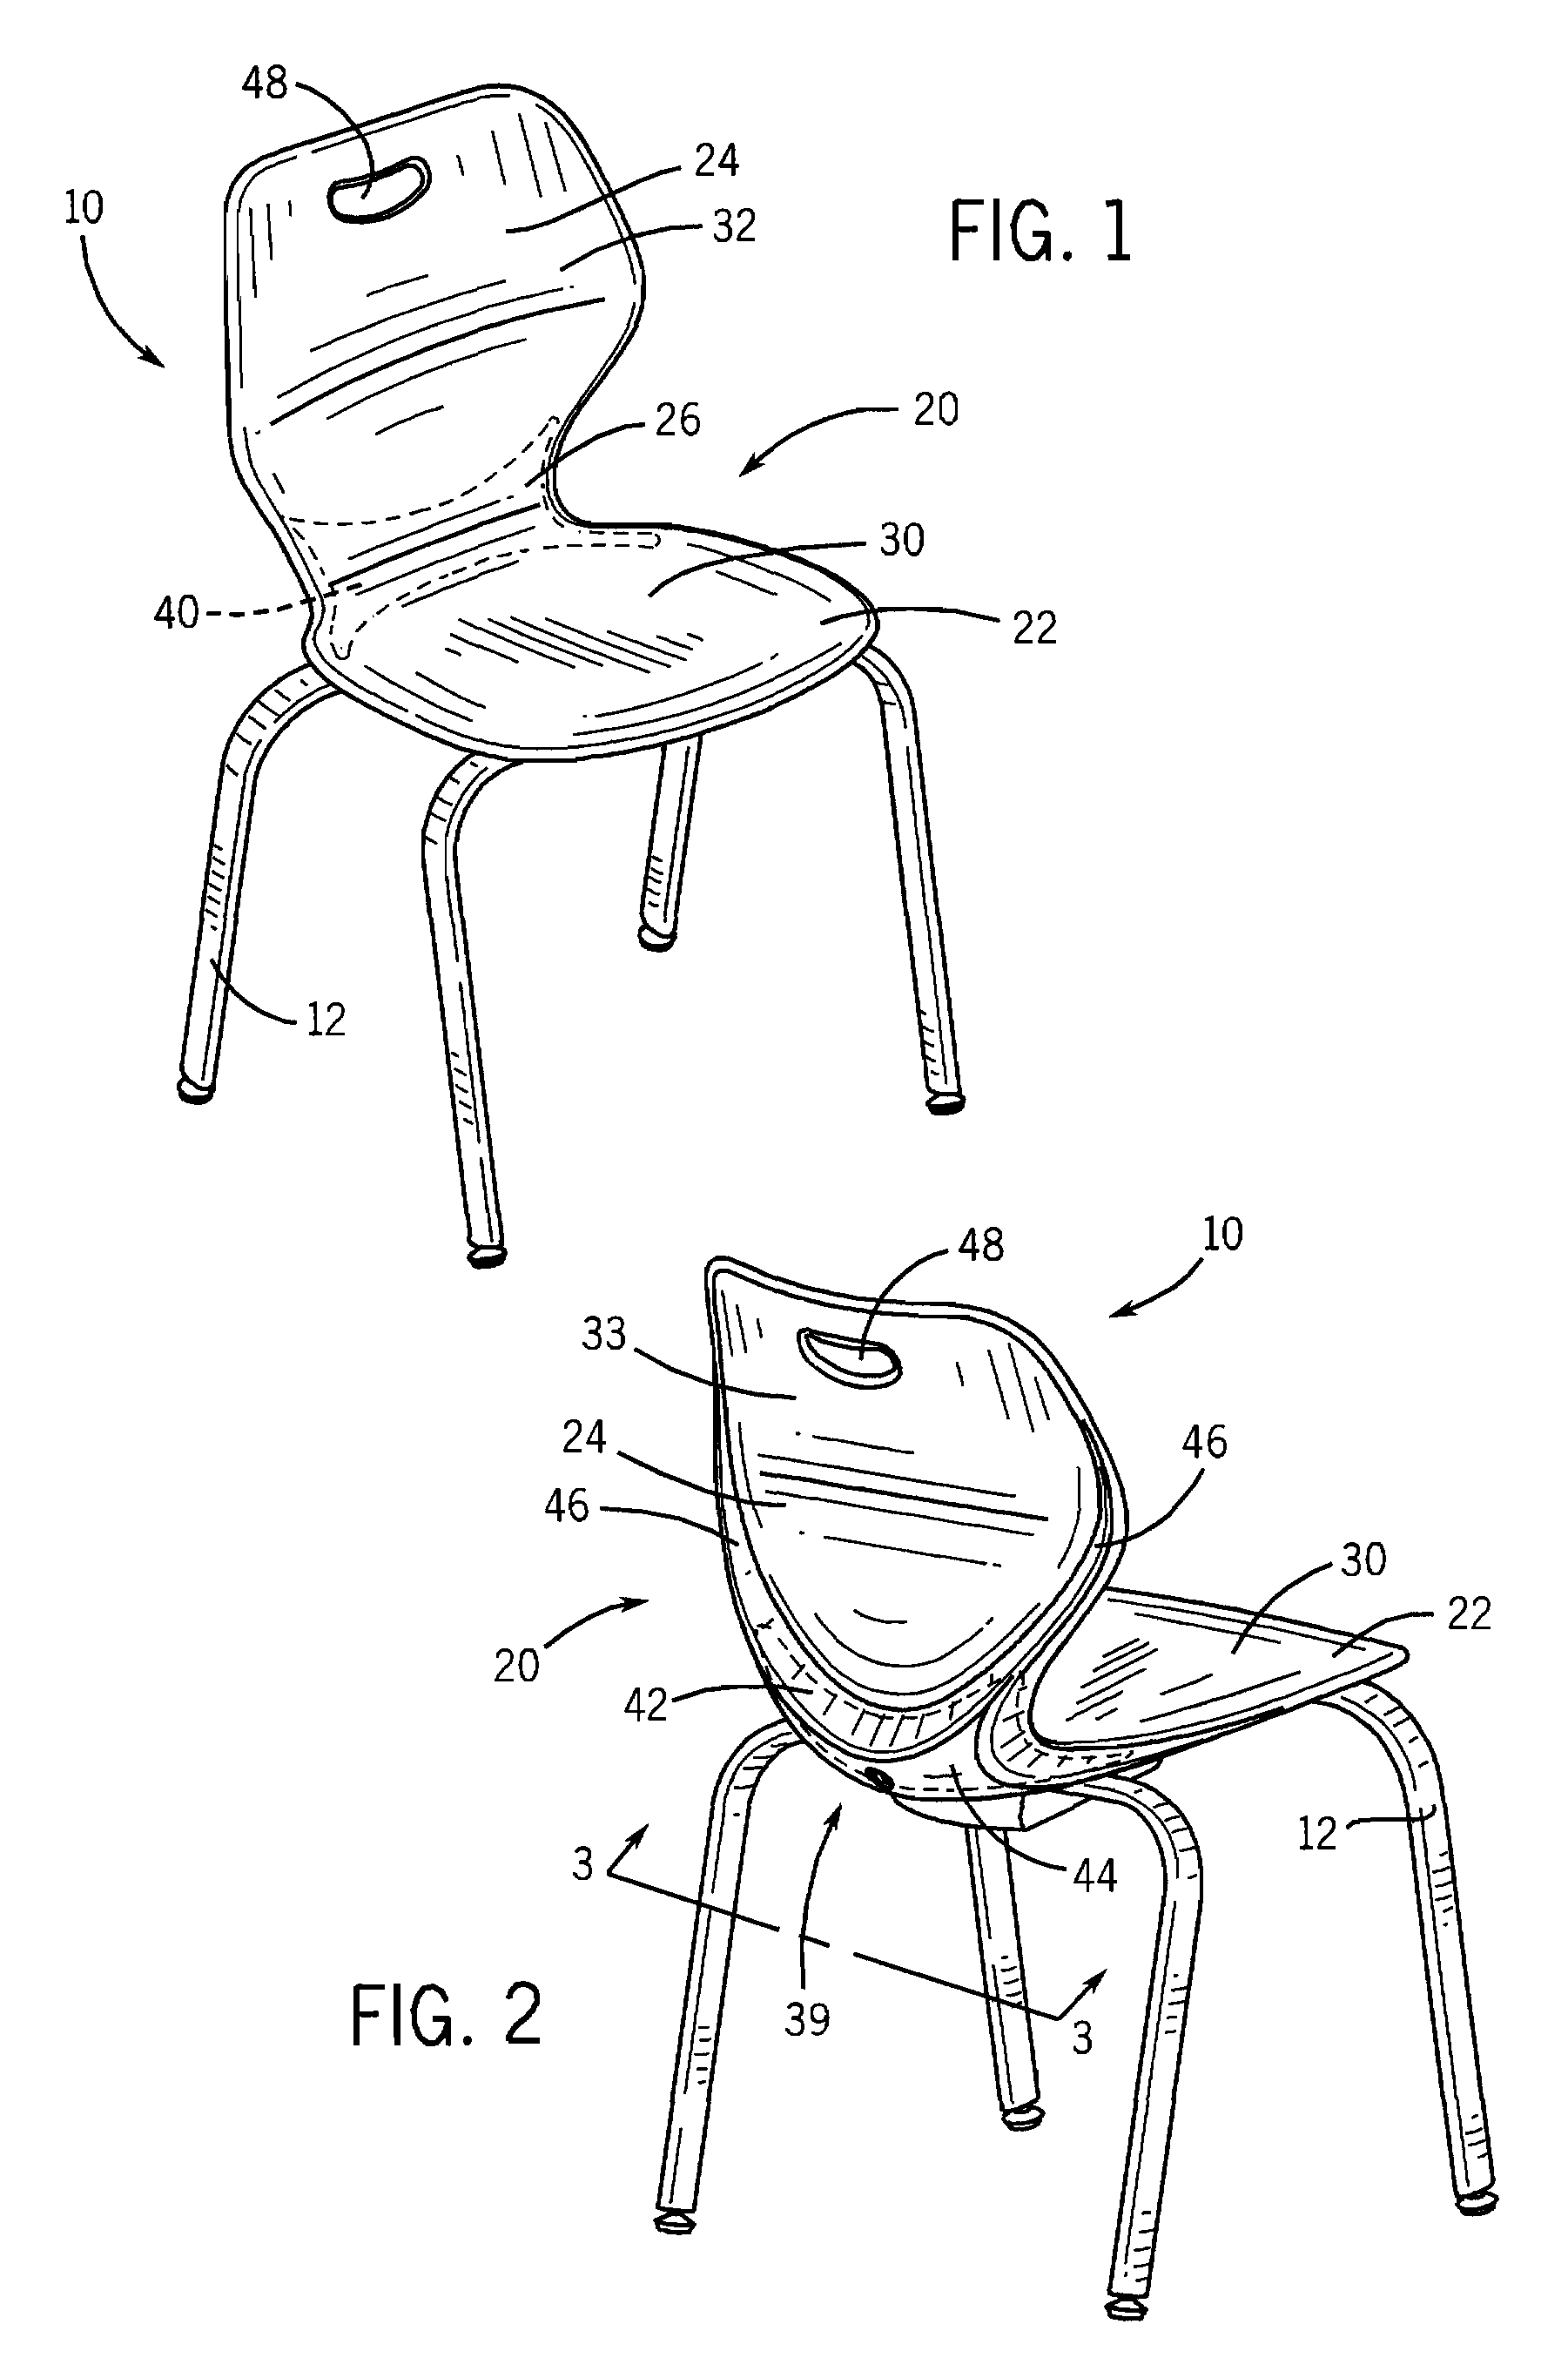 Chair shell with integral hollow contoured support